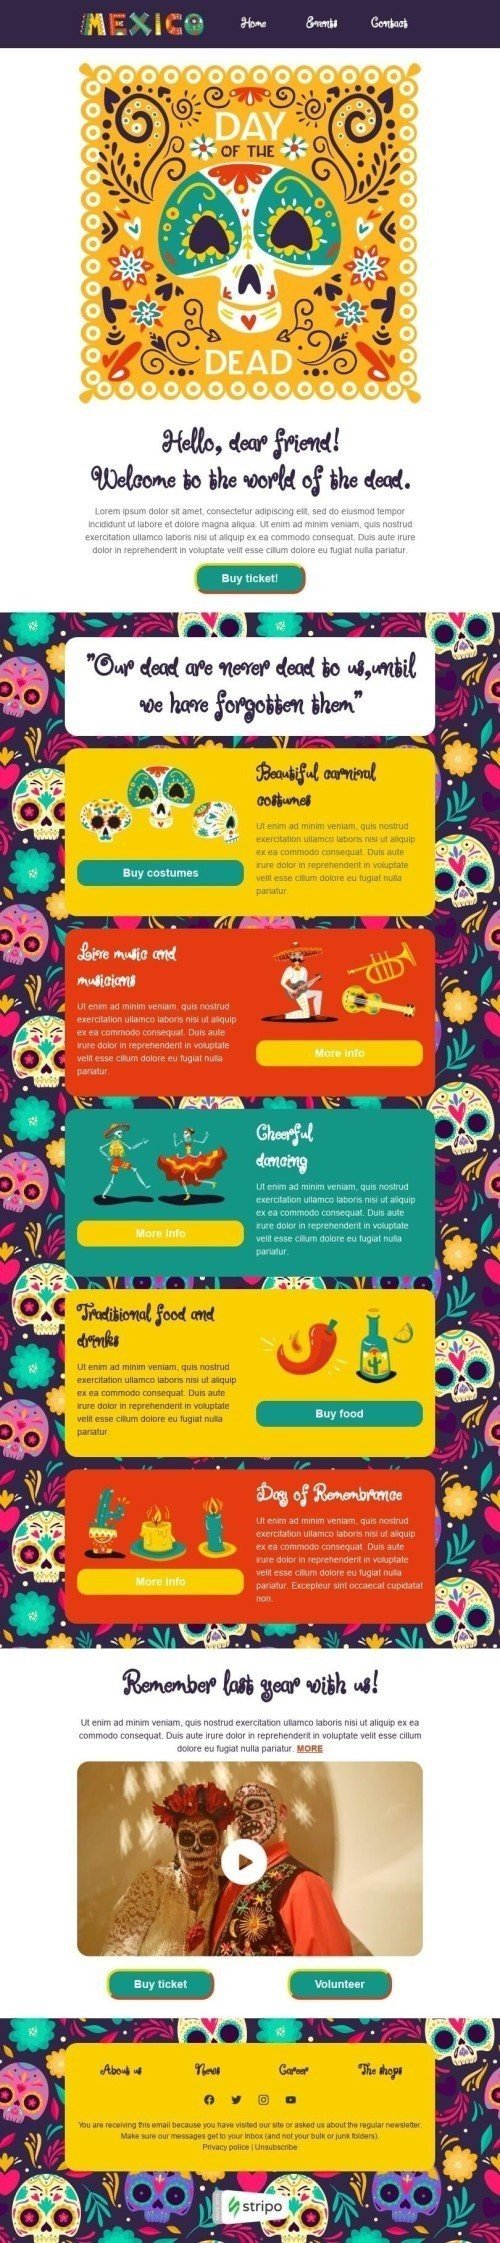 Day of the Dead Email Template "Our dead are never dead to us" for Hobbies industry mobile view